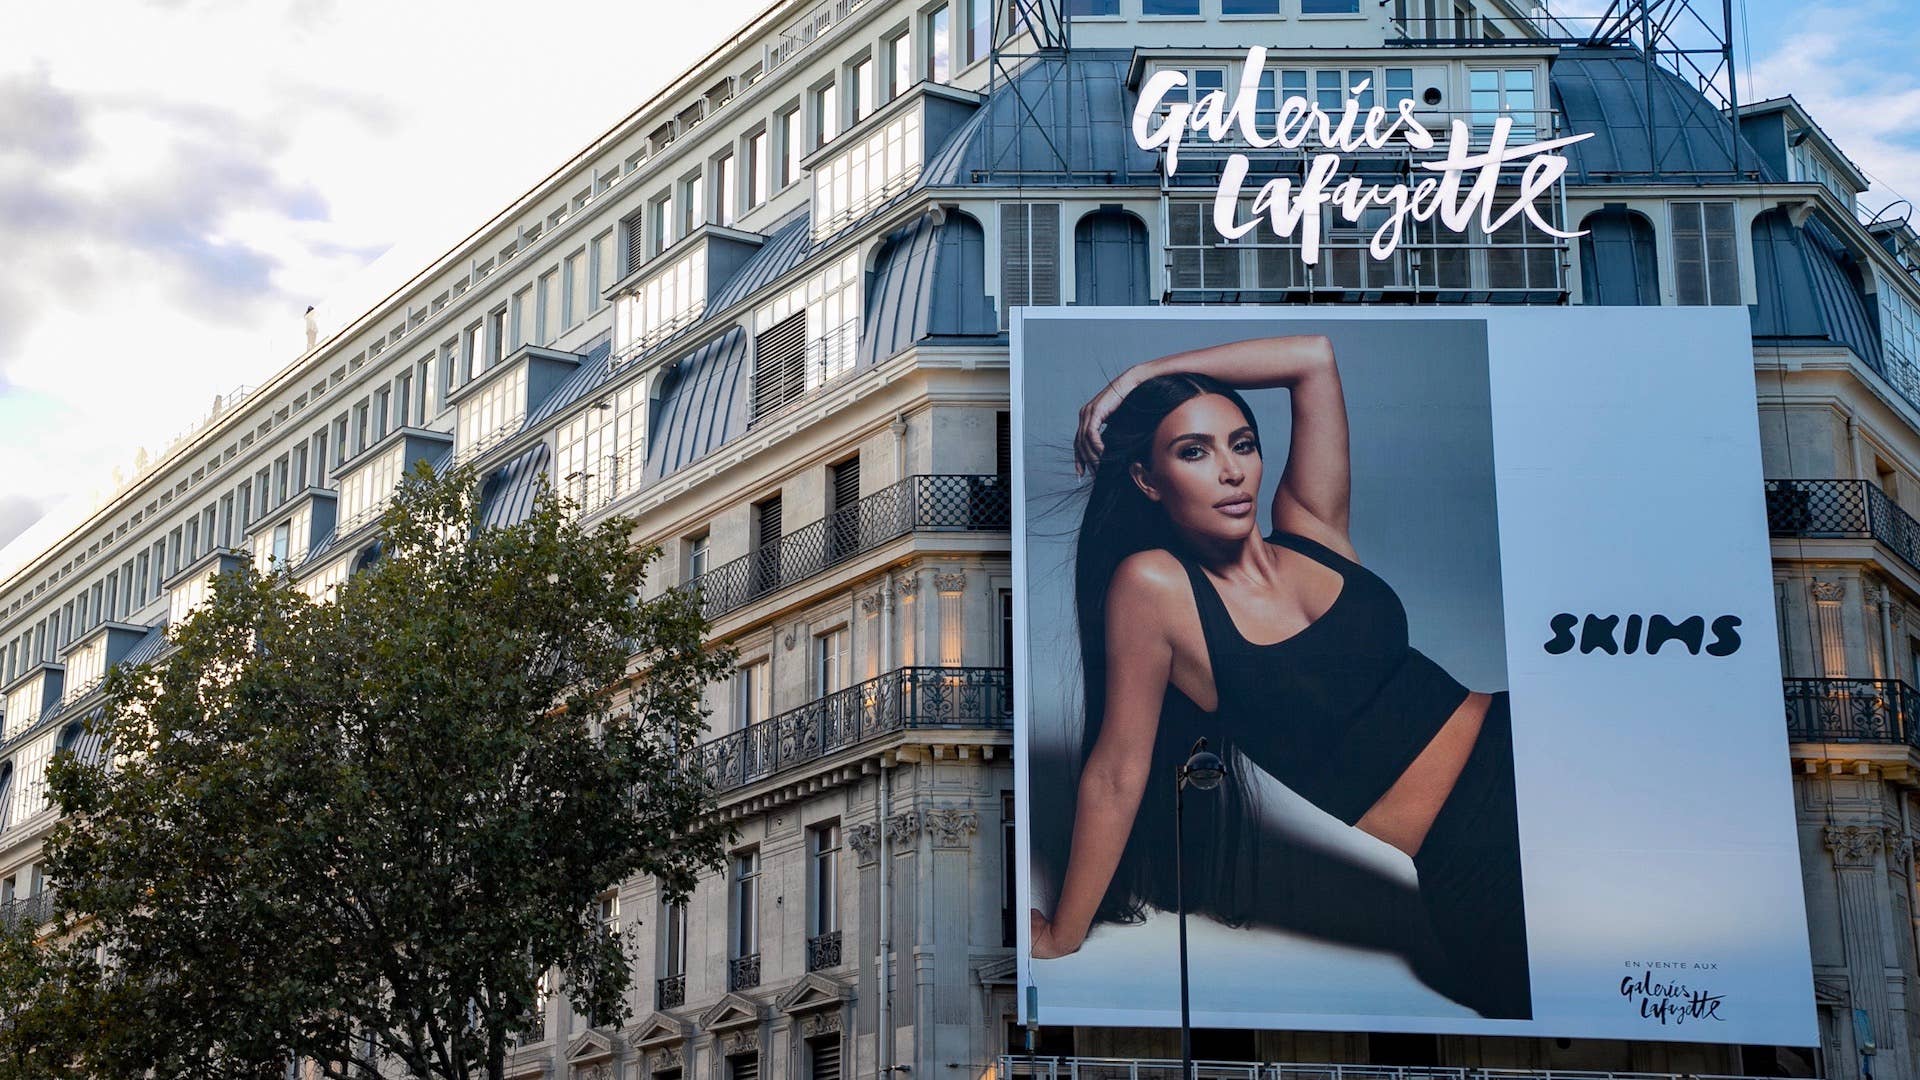 A SKIMS giant poster with Kim Kardashian West is displayed at the 'Galeries Lafayette'